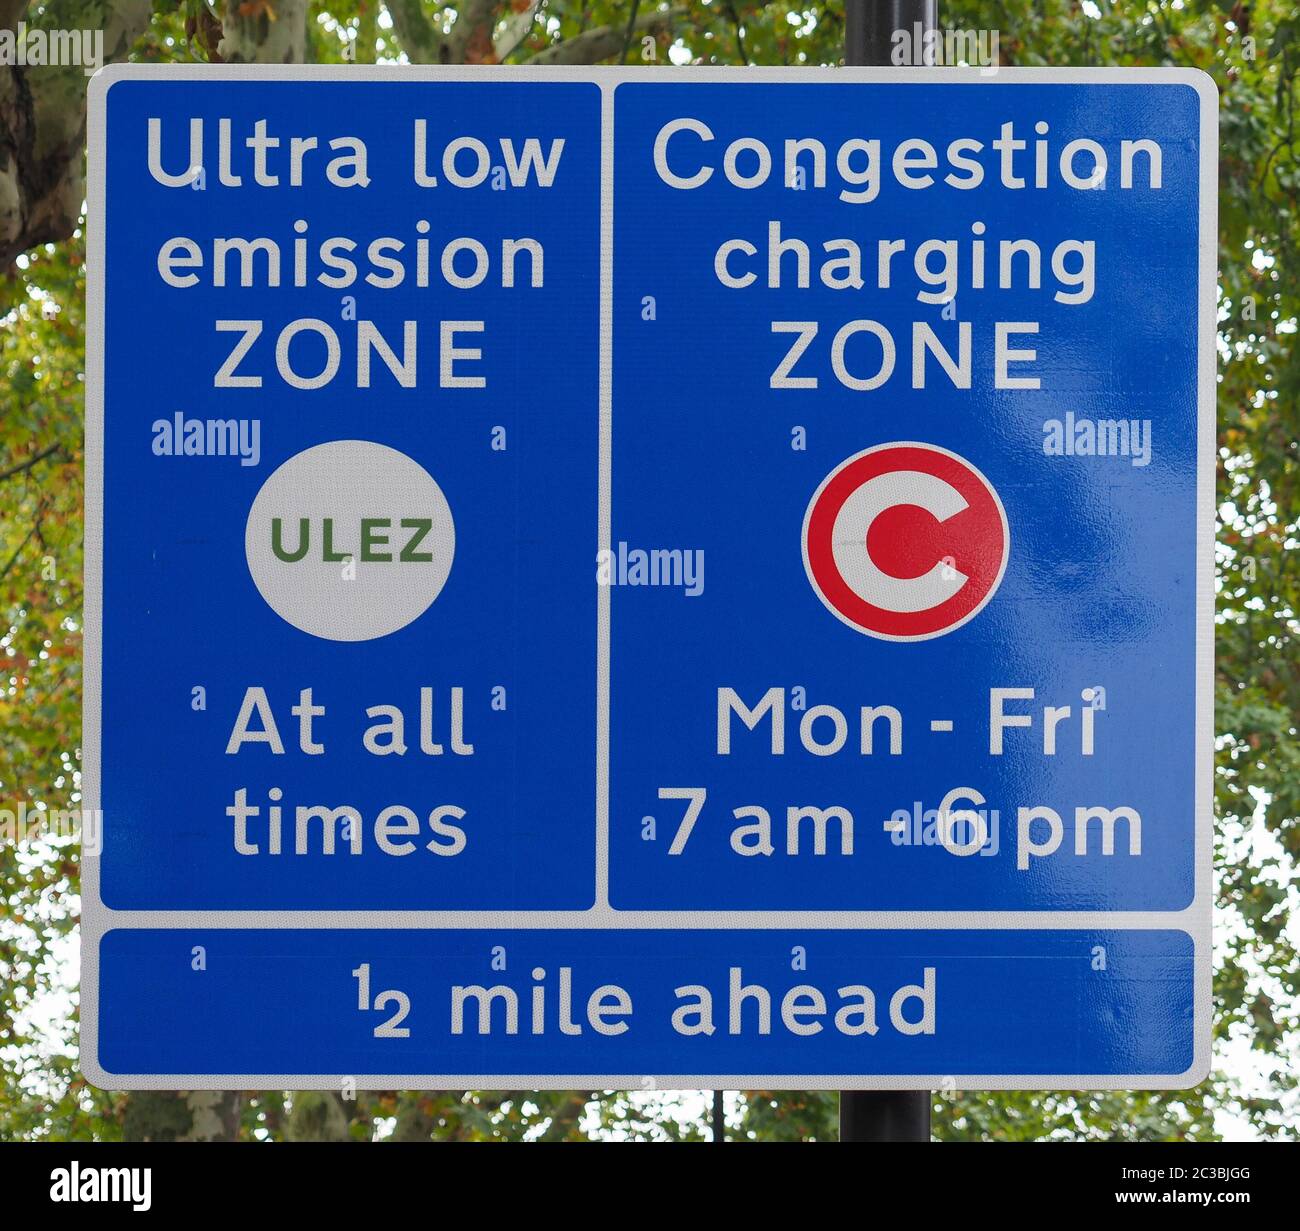 ULEZ (Ultra low emission zone at all times) and C (Congestion charging zone) signs in London, UK Stock Photo